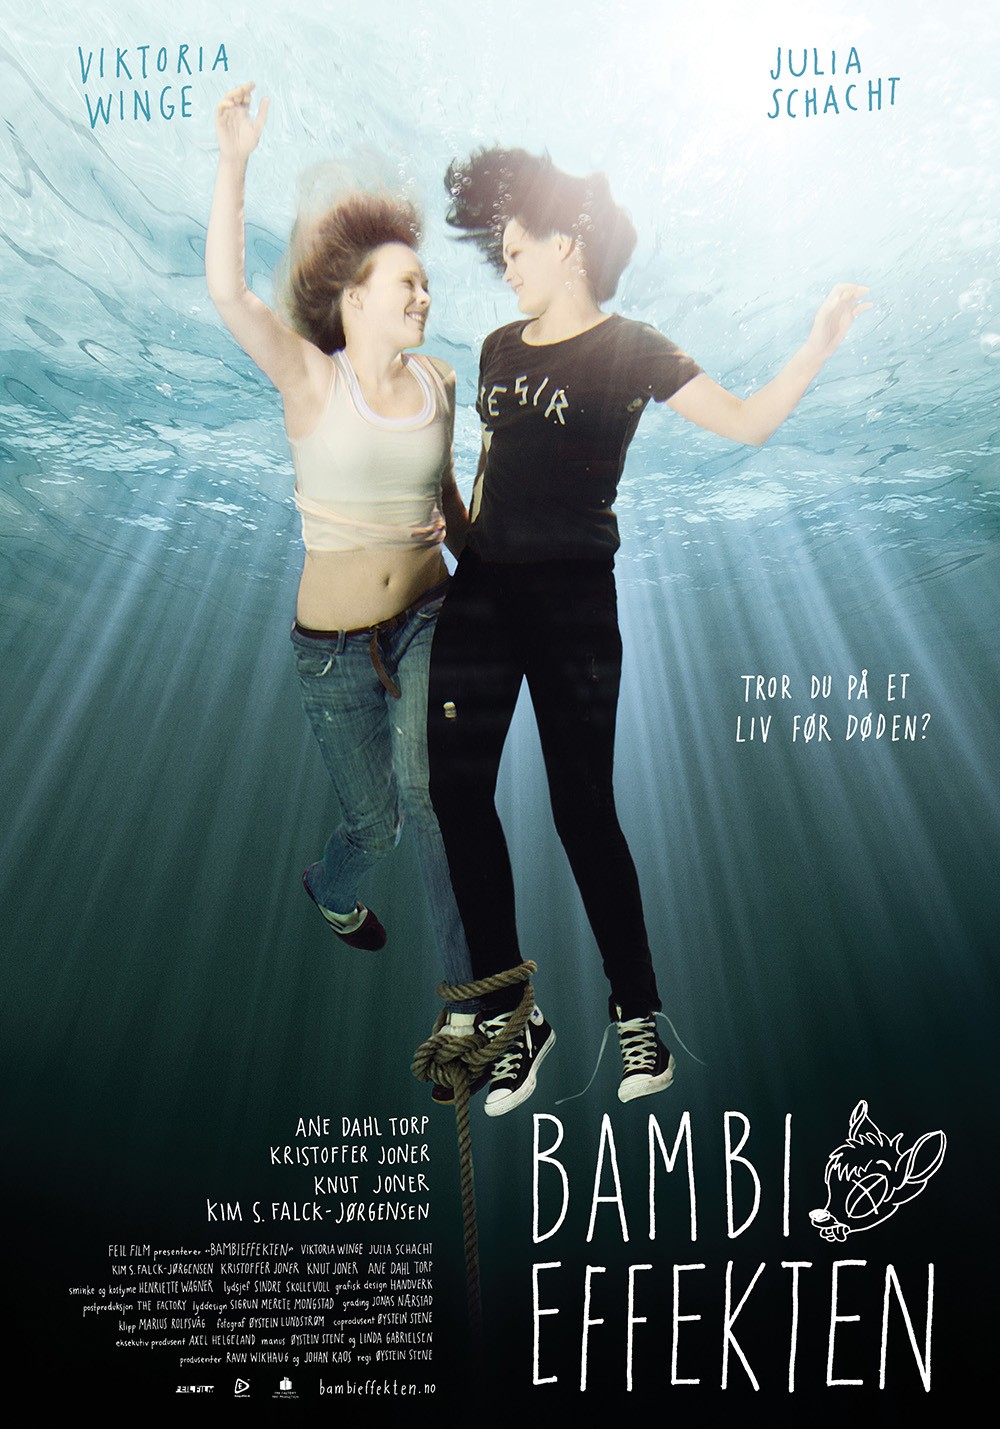 Extra Large Movie Poster Image for Bambieffekten (#2 of 2)